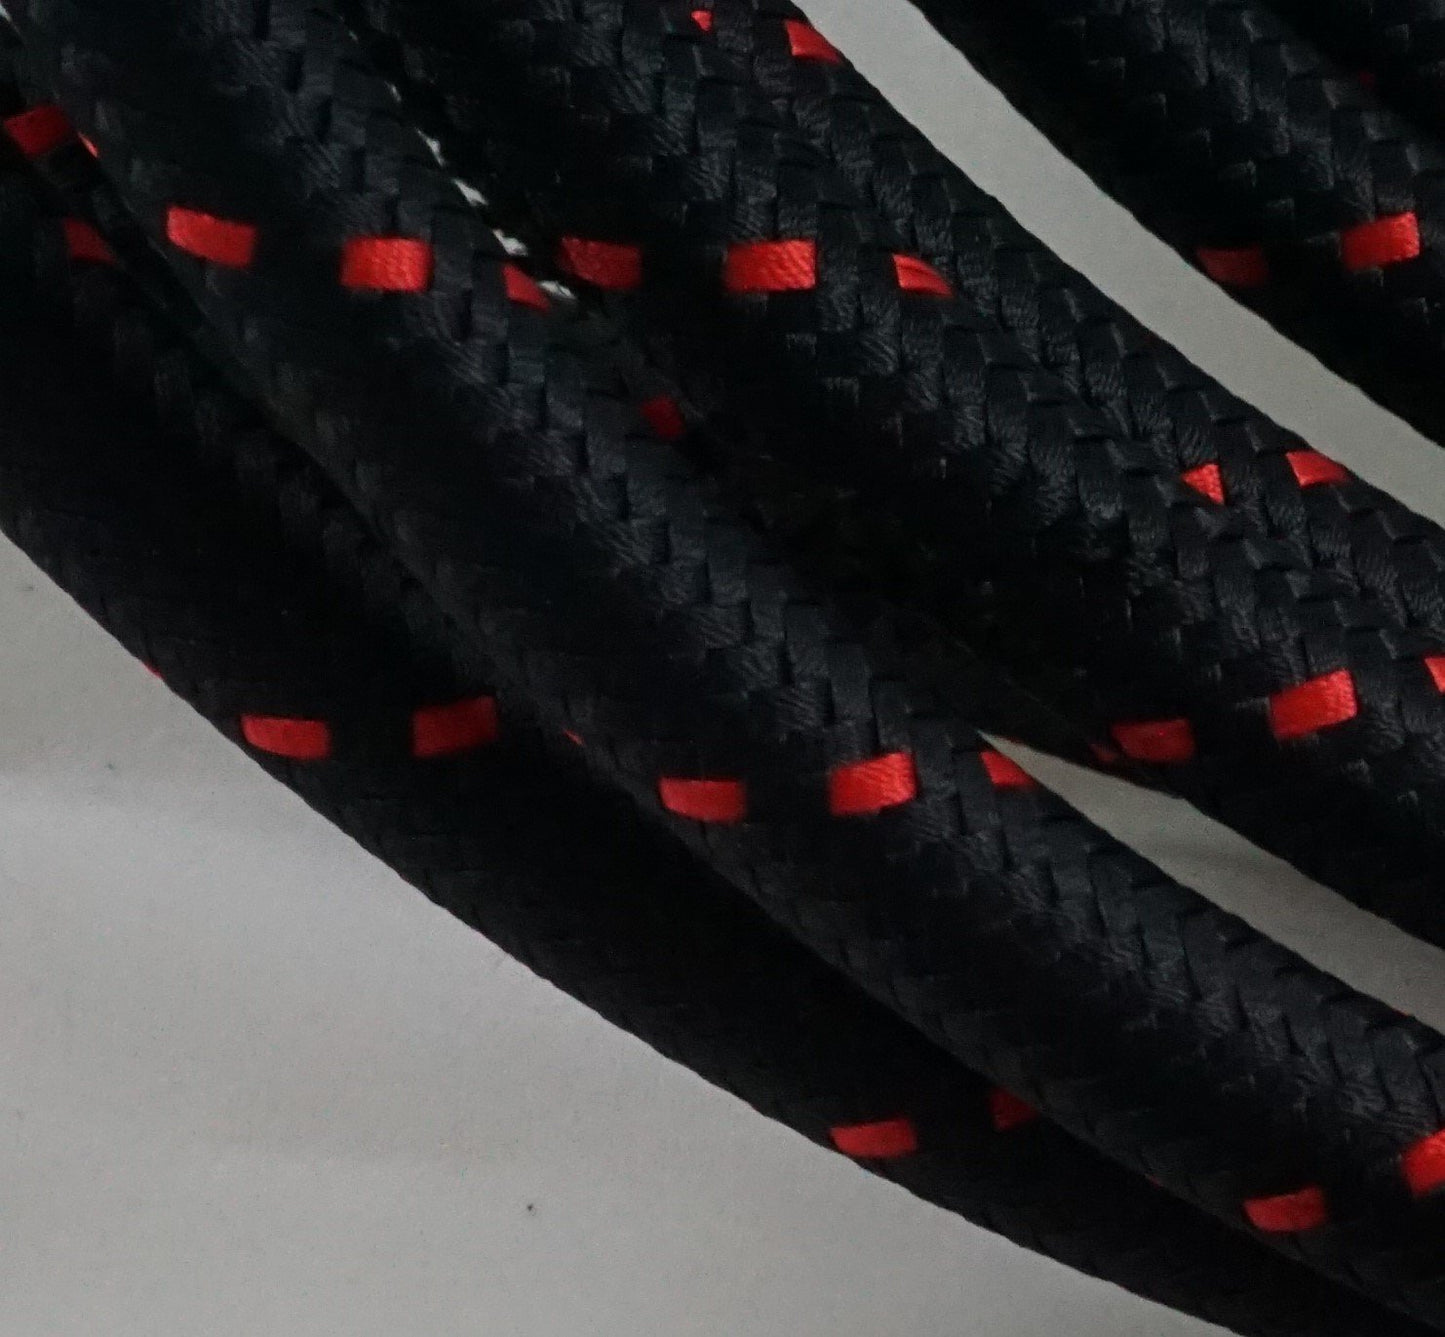 PTFE lined Black Nylon with Red Check braided hose - AN6, AN8, AN10 - Hot Rod fuel hose by One Guy Garage